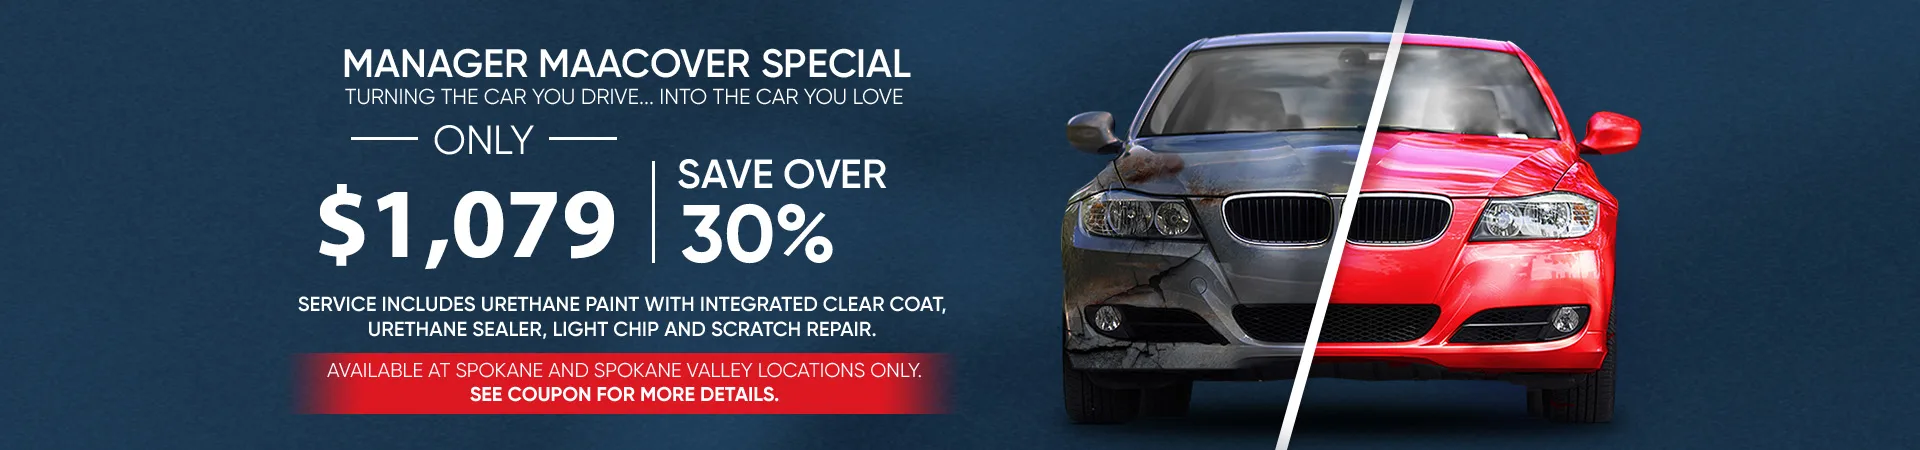 Manager Maacover Special. Turning the car you drive...into the car you love. Only $1,079 - save over 30%. Service includes urethane paint with integrated clear coat, urethane sealer, light chip and scratch repair. Available at Spokane and Spokane Valley locations only. See coupon for more details.